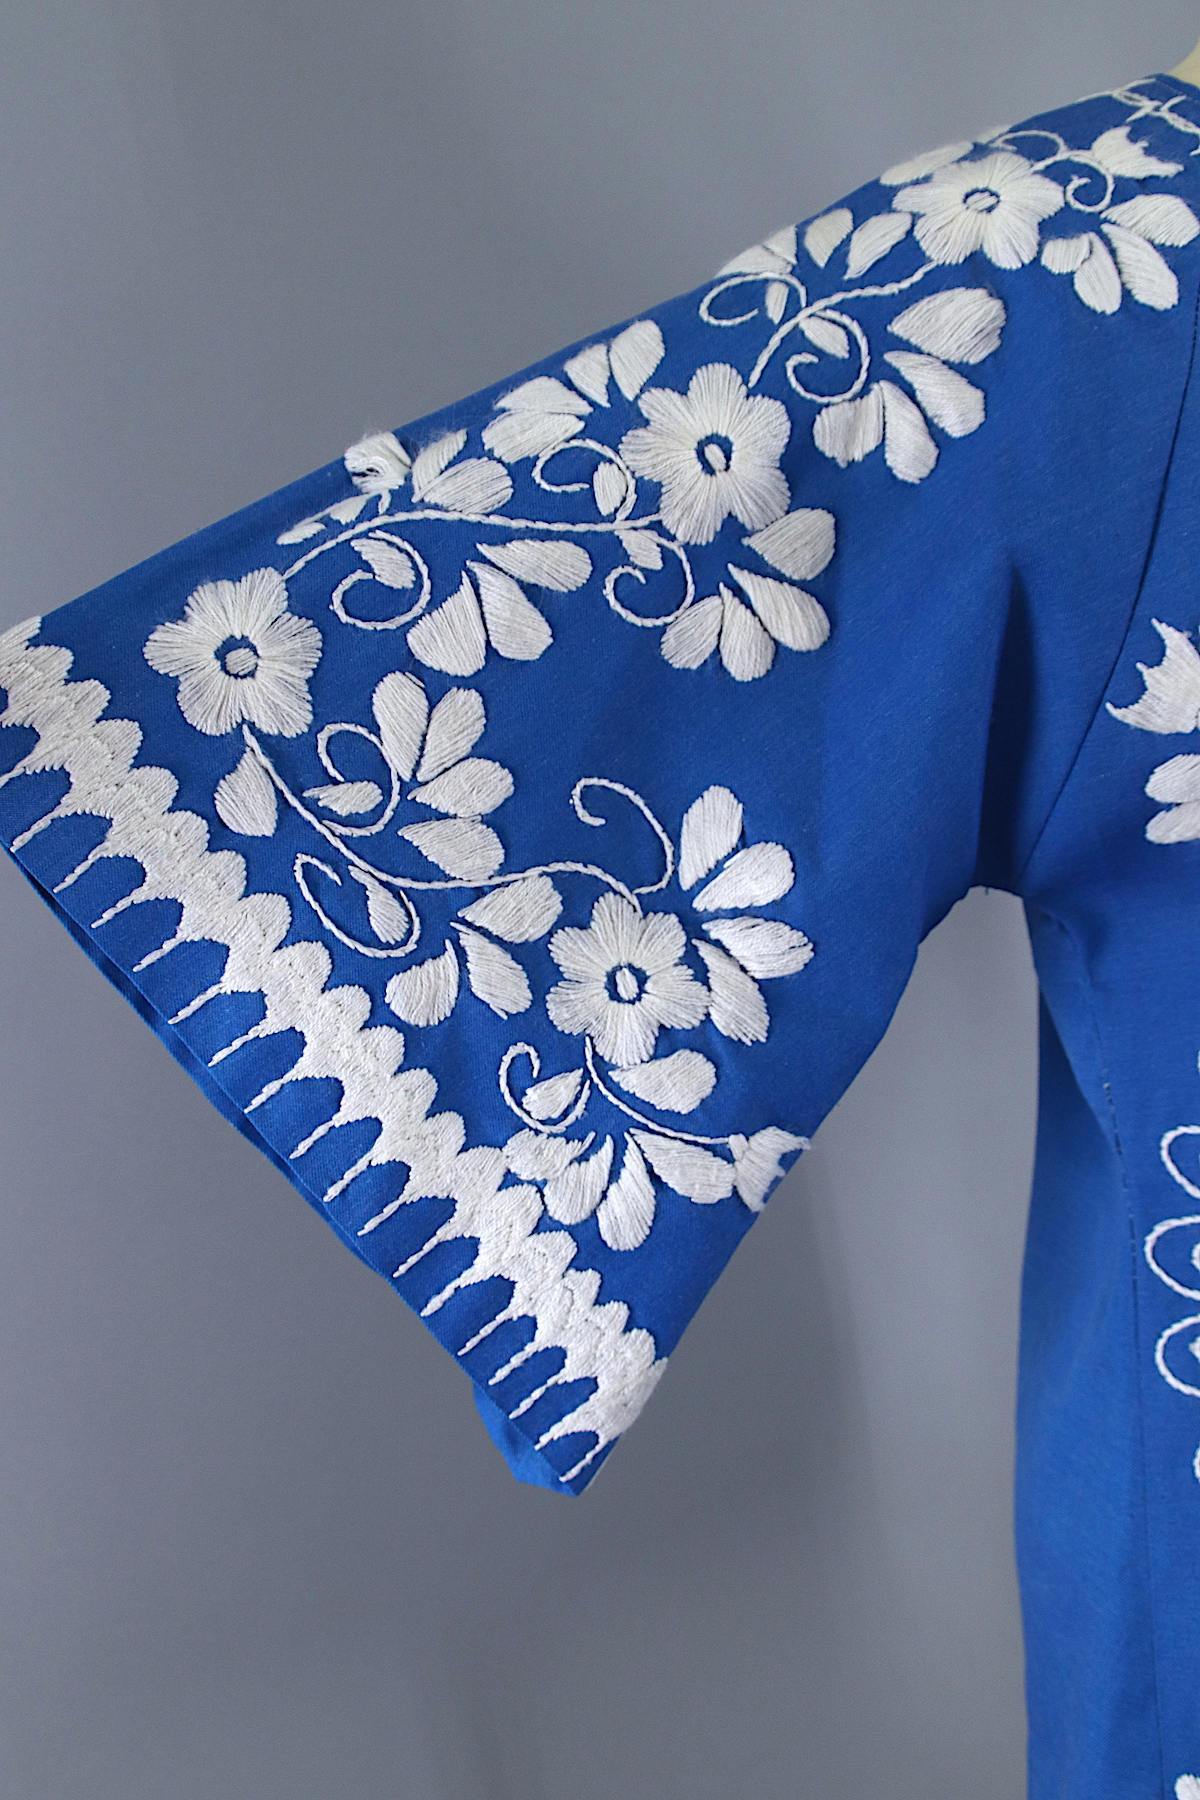 Vintage 1970s Mexican Embroidered Tunic / BLUE PEACOCKS / Oaxaca Embroidery - ThisBlueBird